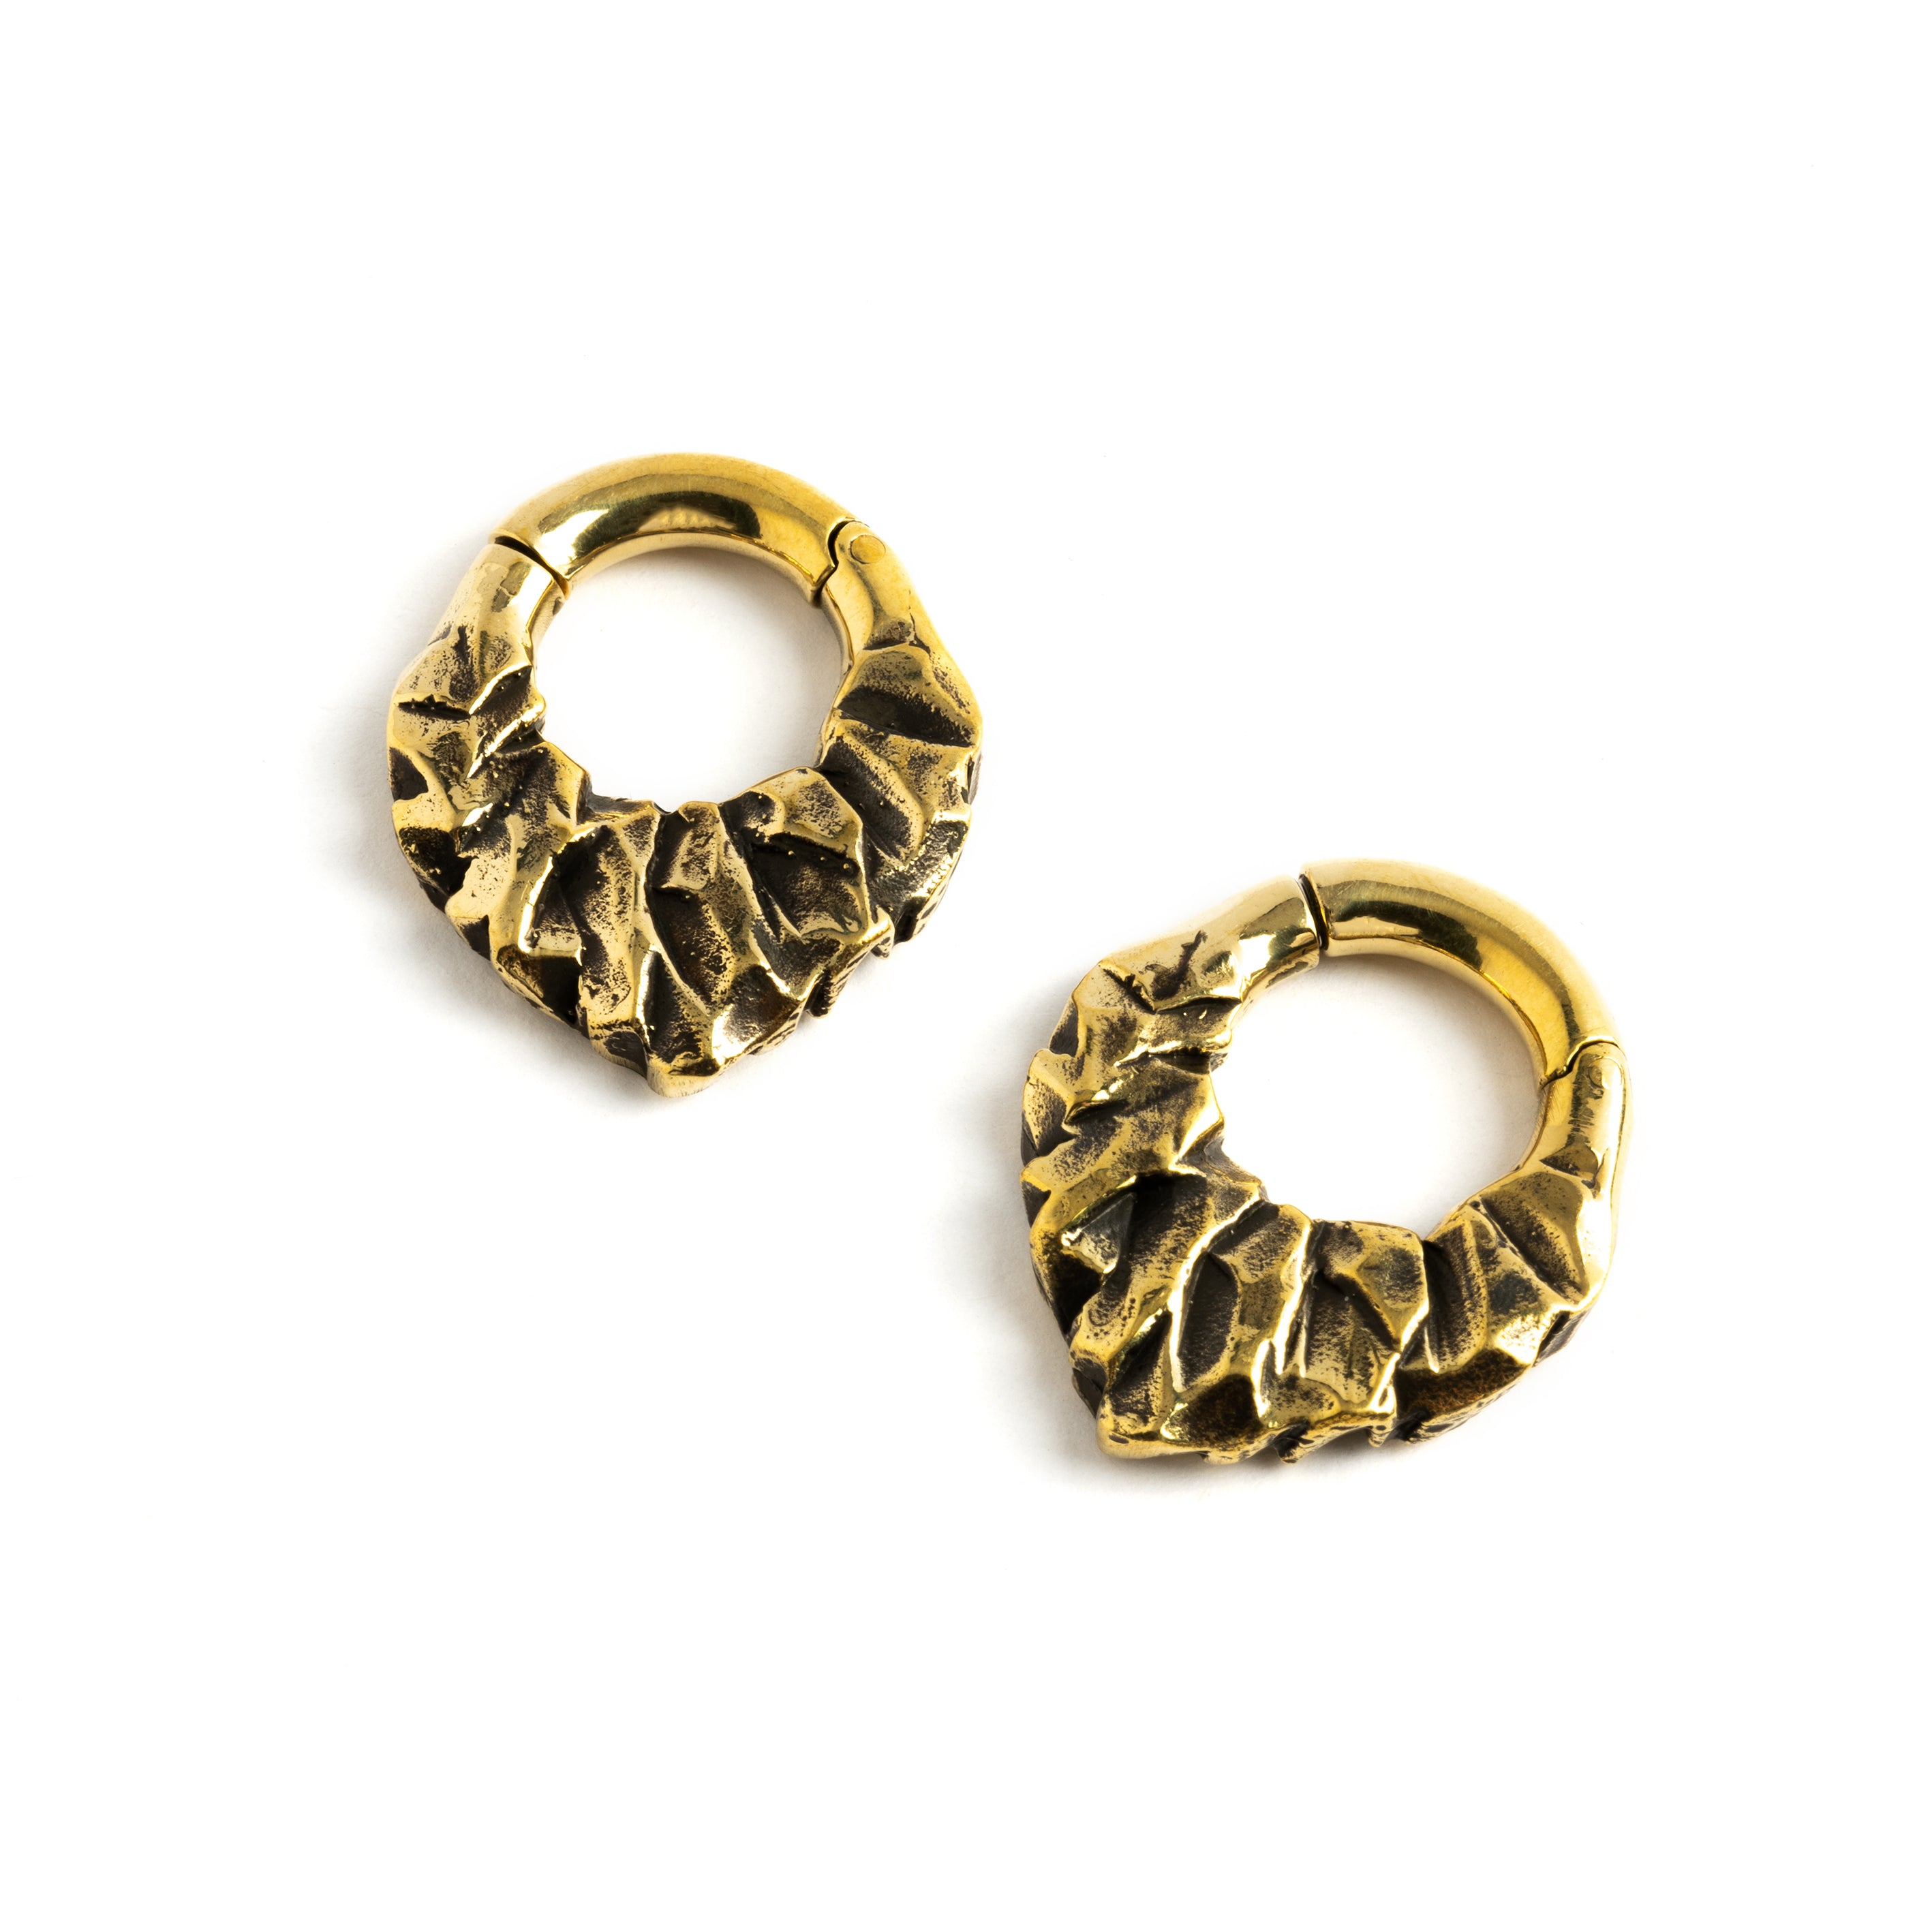 pair of gold brass teardrop shaped ear hoops hangers with rocky texture